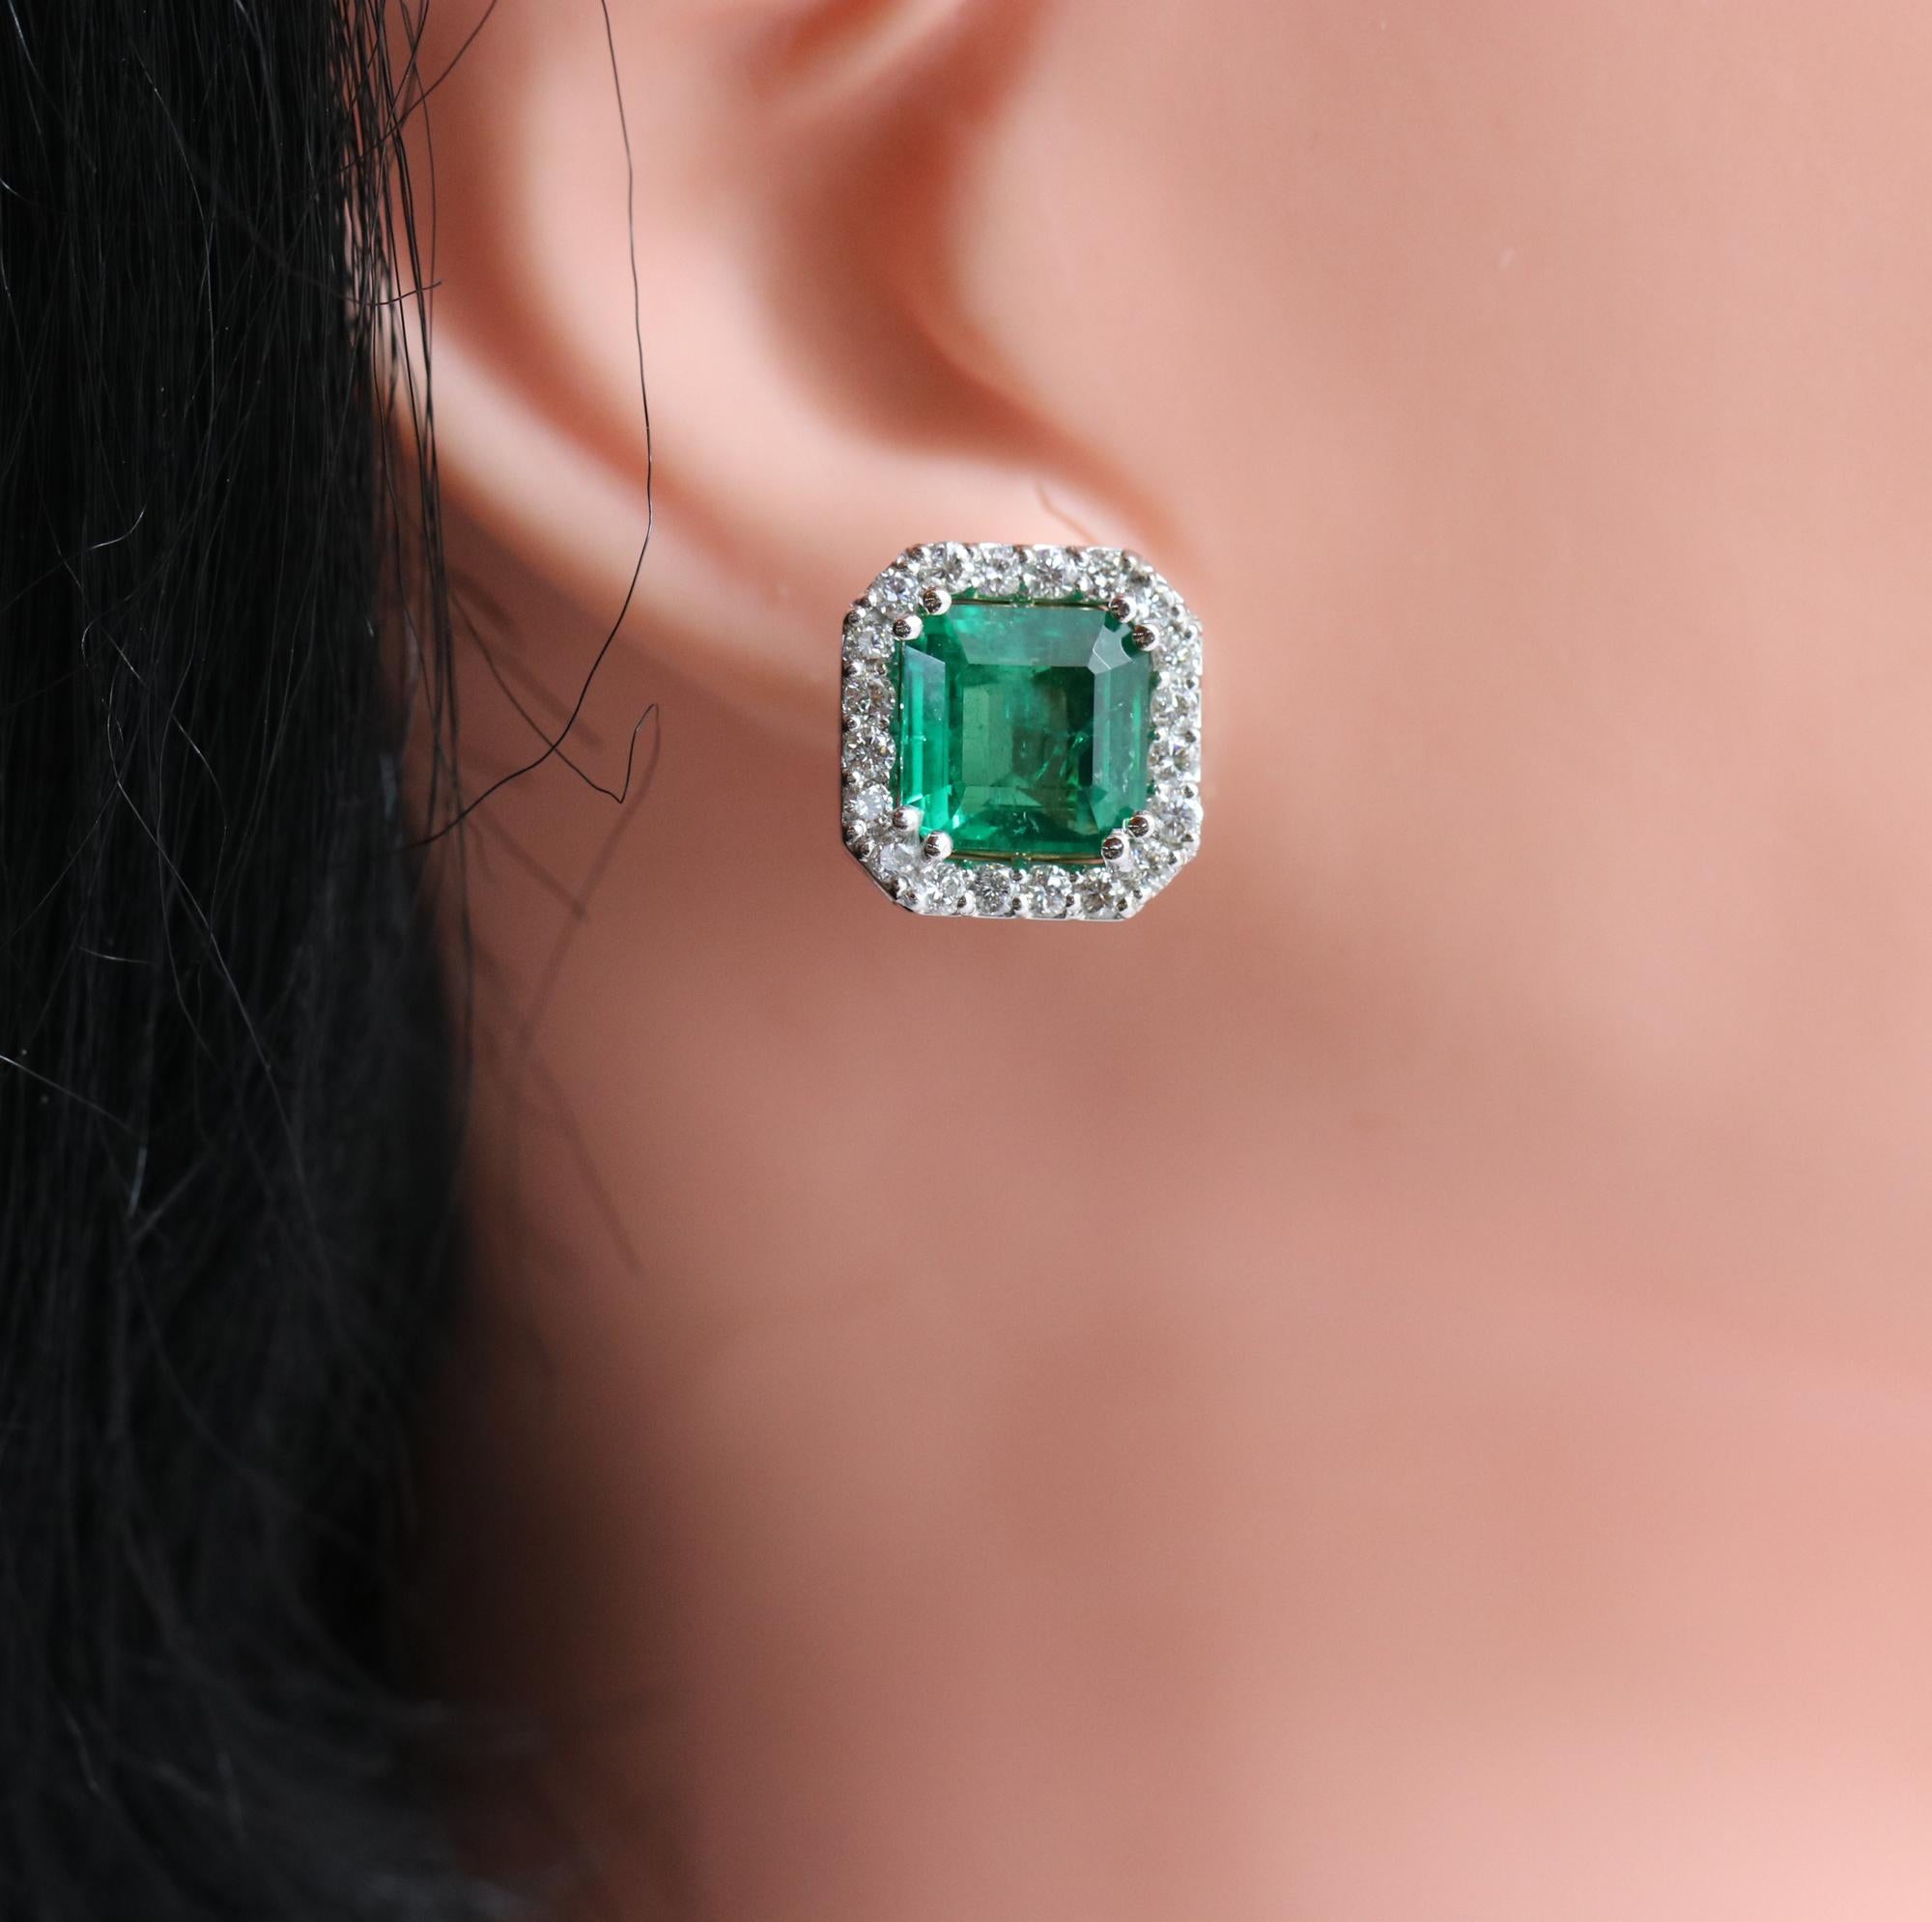 White Gold Zambian Emerald and Diamond Earrings with AGL Certificate 1